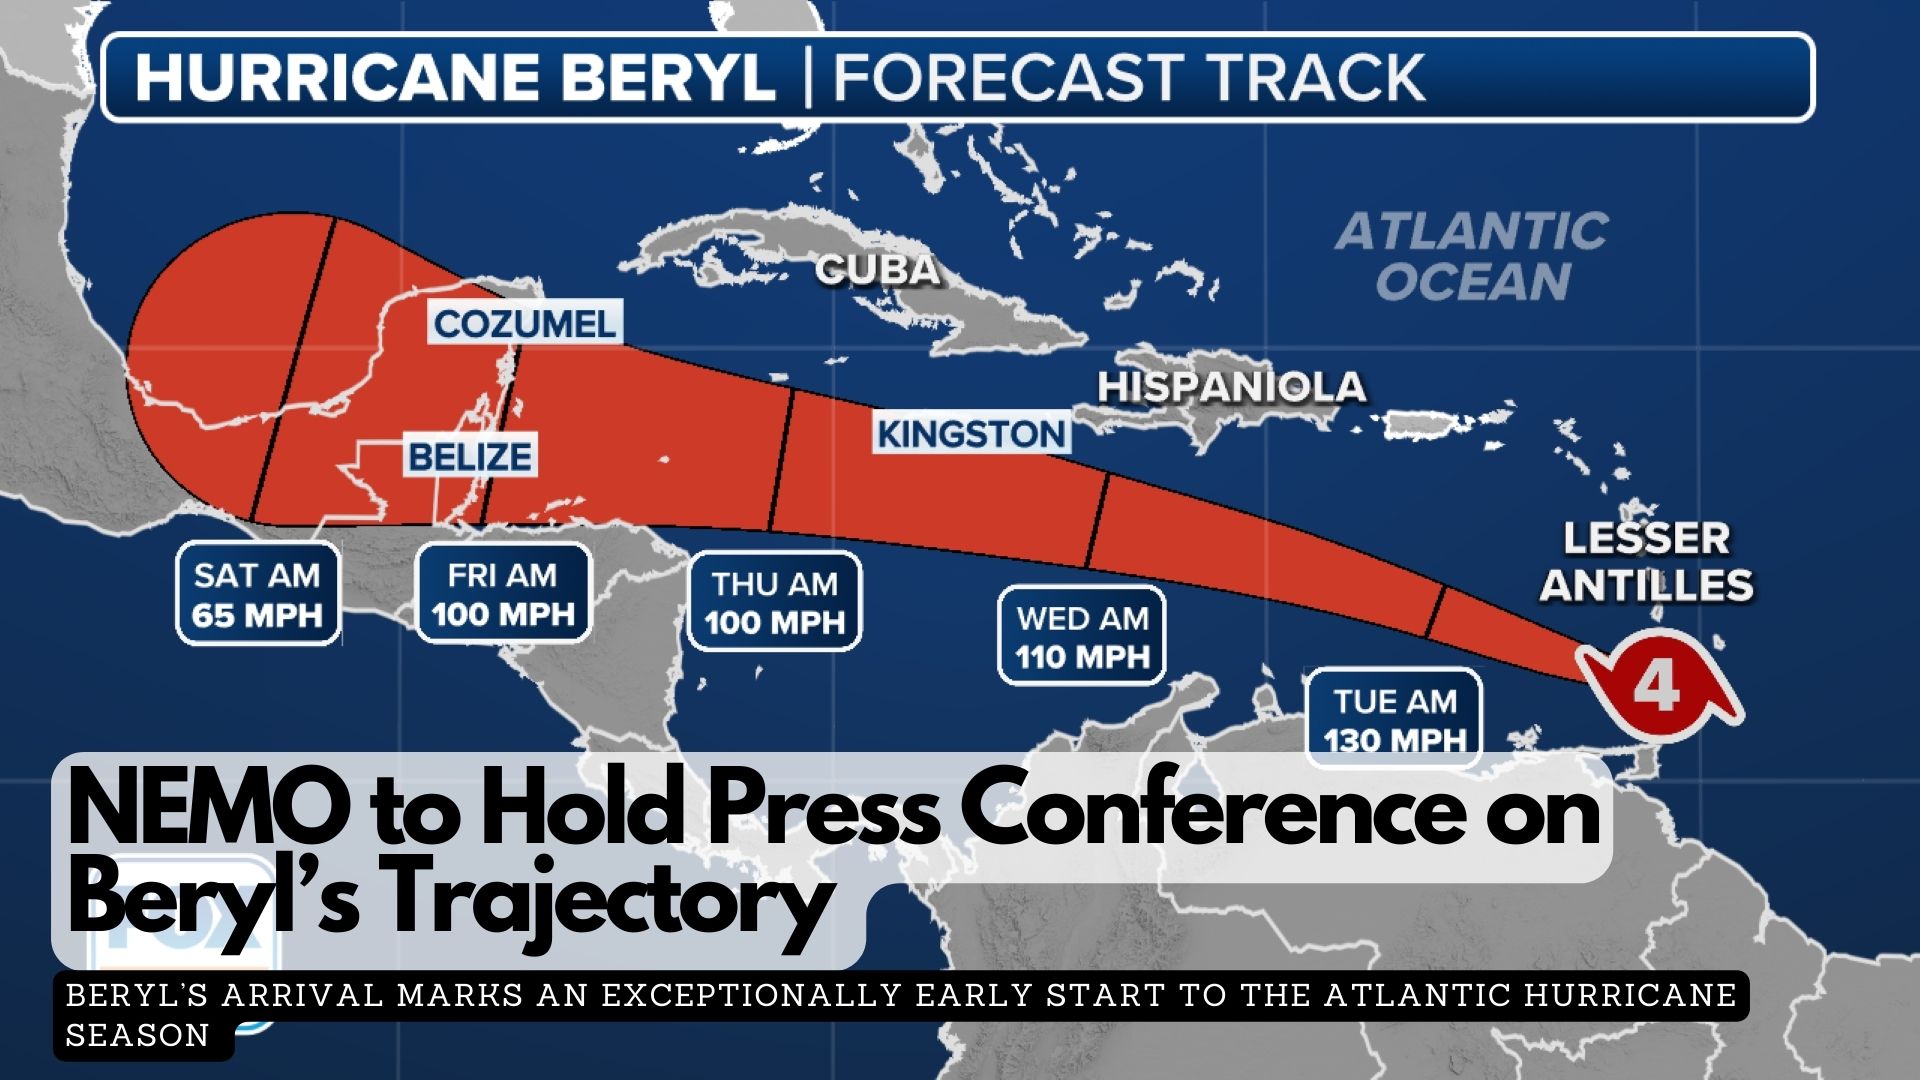 NEMO to Hold Press Conference on Beryl’s Trajectory 